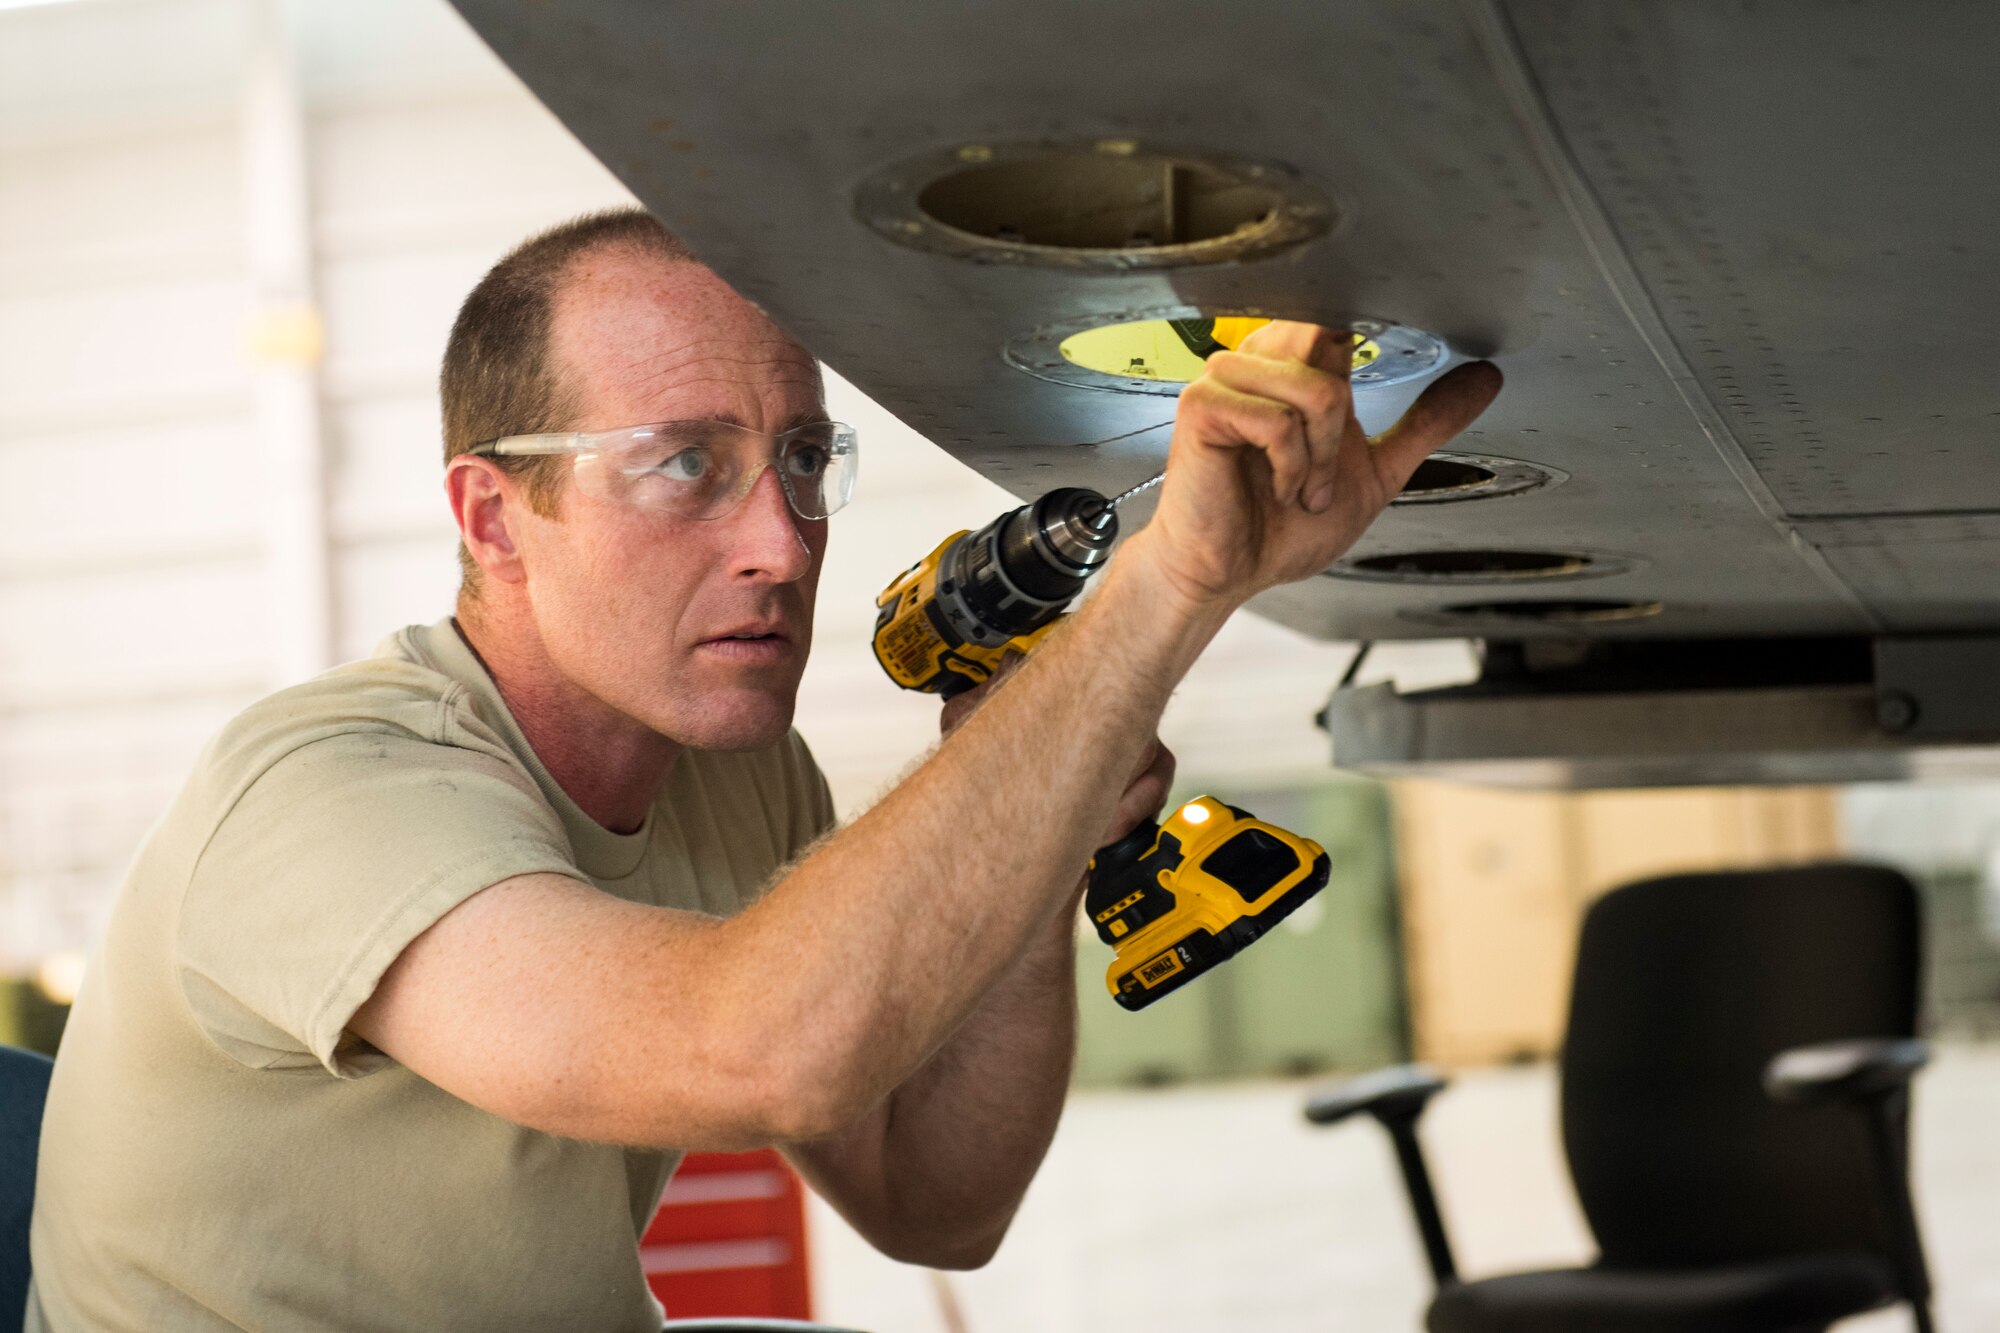 Staff Sgt. Doug Miller, an aircraft maintainer for the 167th Maintenance Group, clears corroded drainage channels inside a C-17 Globemaster III aircraft's cargo ramp canted bulkhead which had corroded over time due to sealed drainage holes, May27, 2020,at the 167th Airlift Wing, Martinsburg, W.Va.